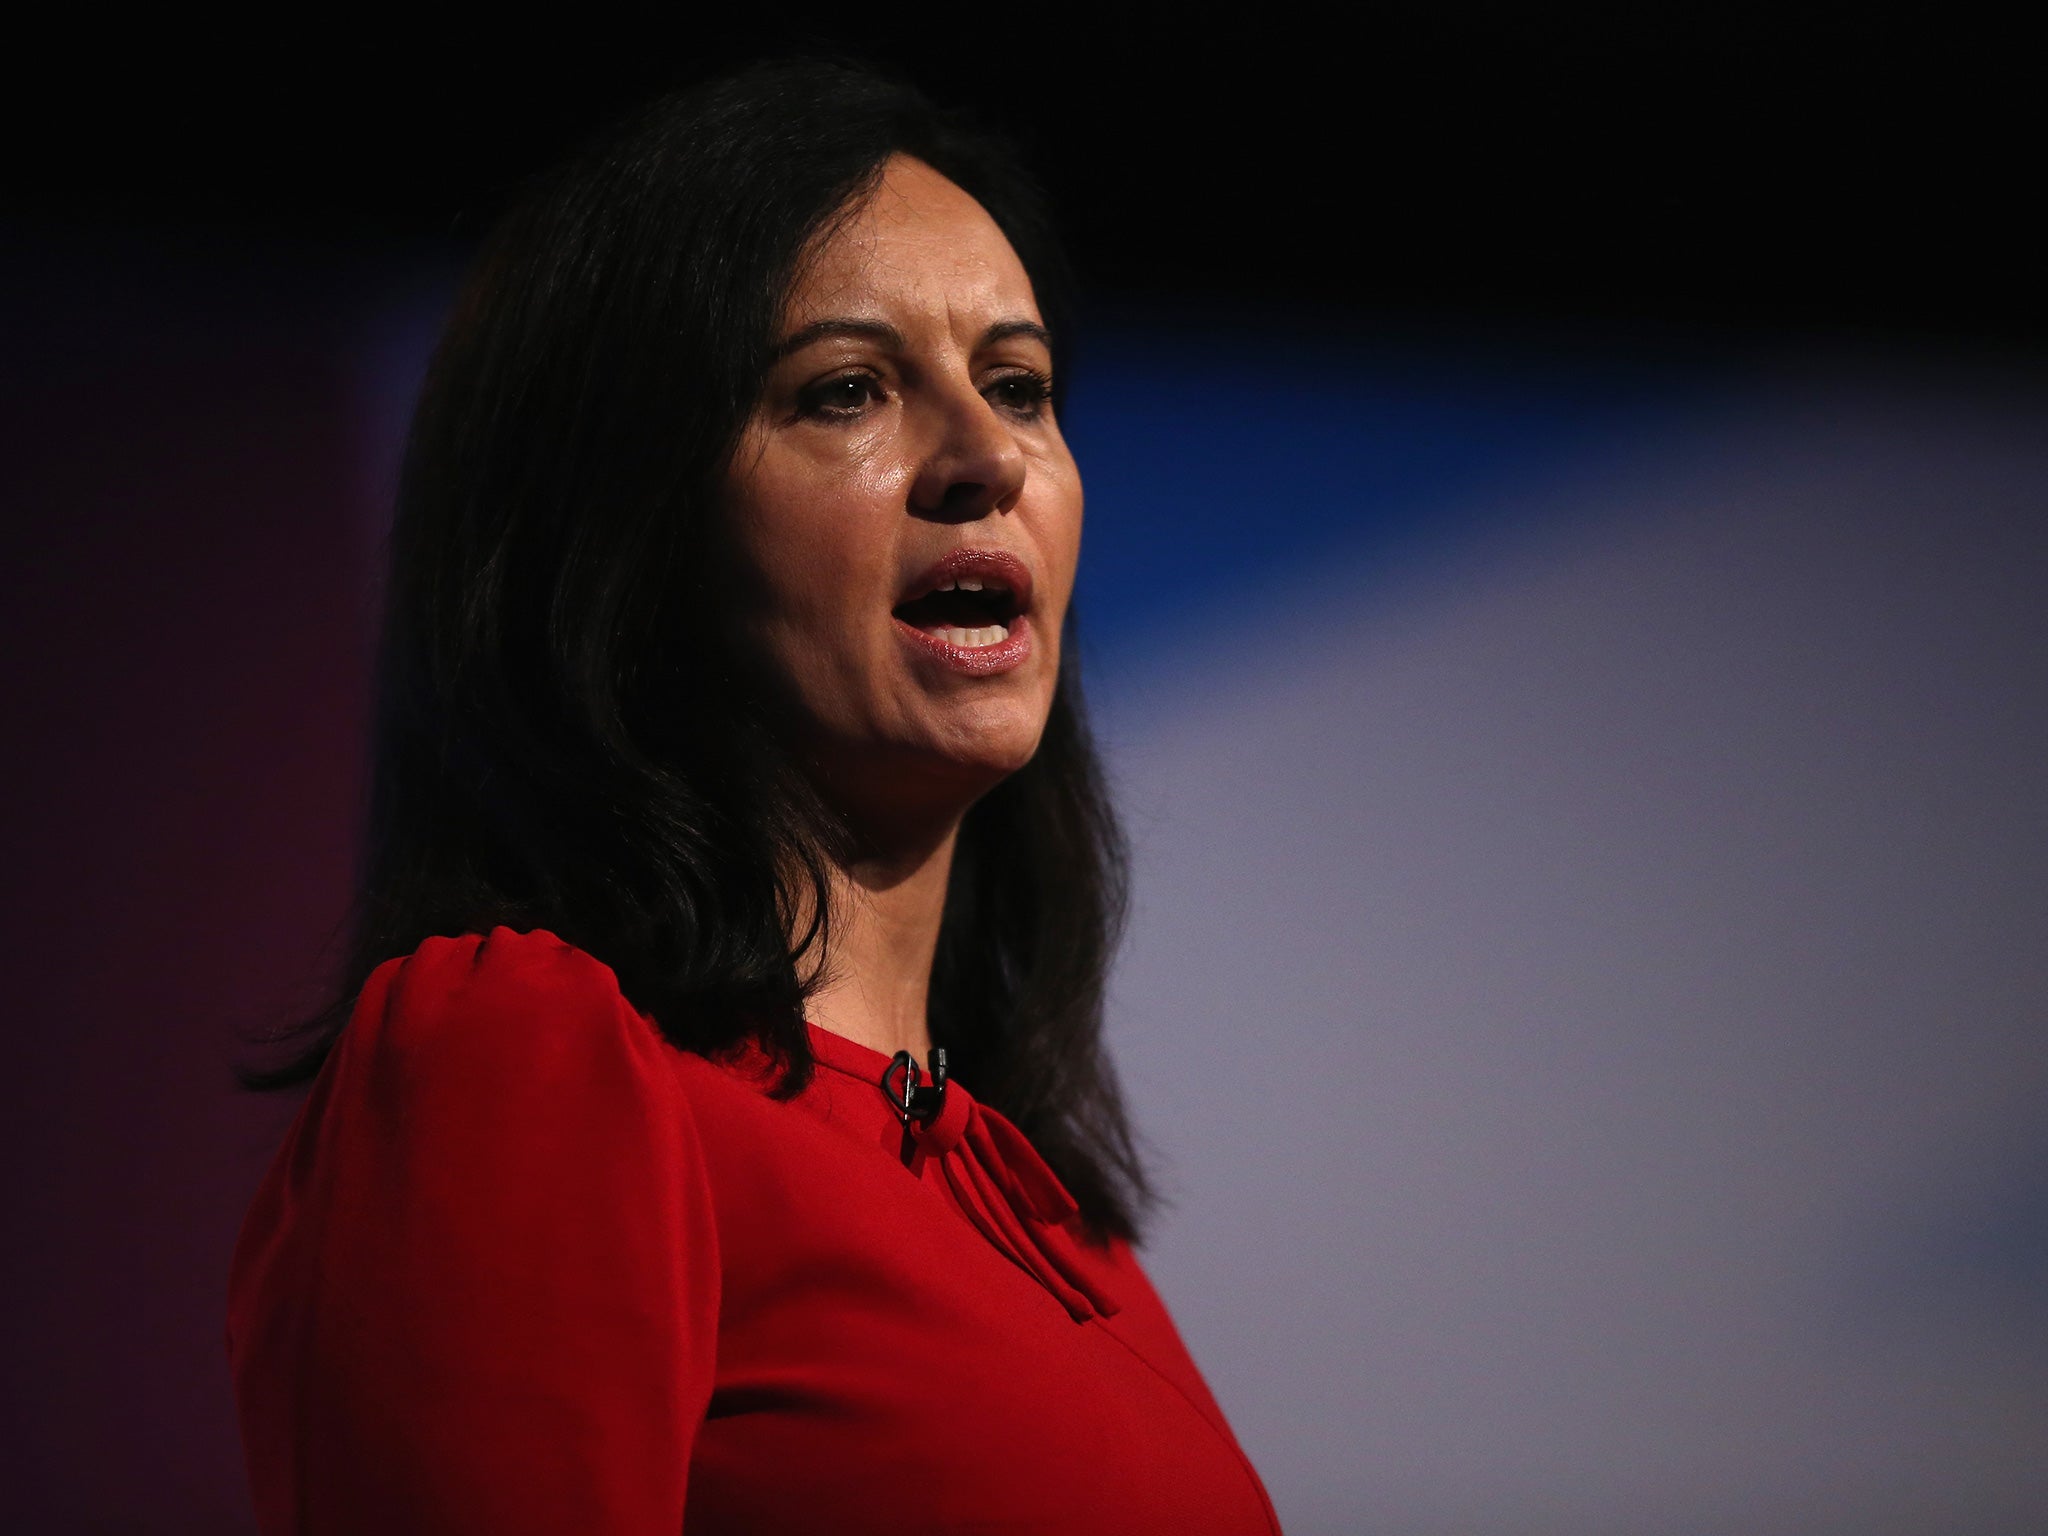 Caroline Flint, Labour MP for Don Valley, has spoken out about her concerns with the Labour leadership